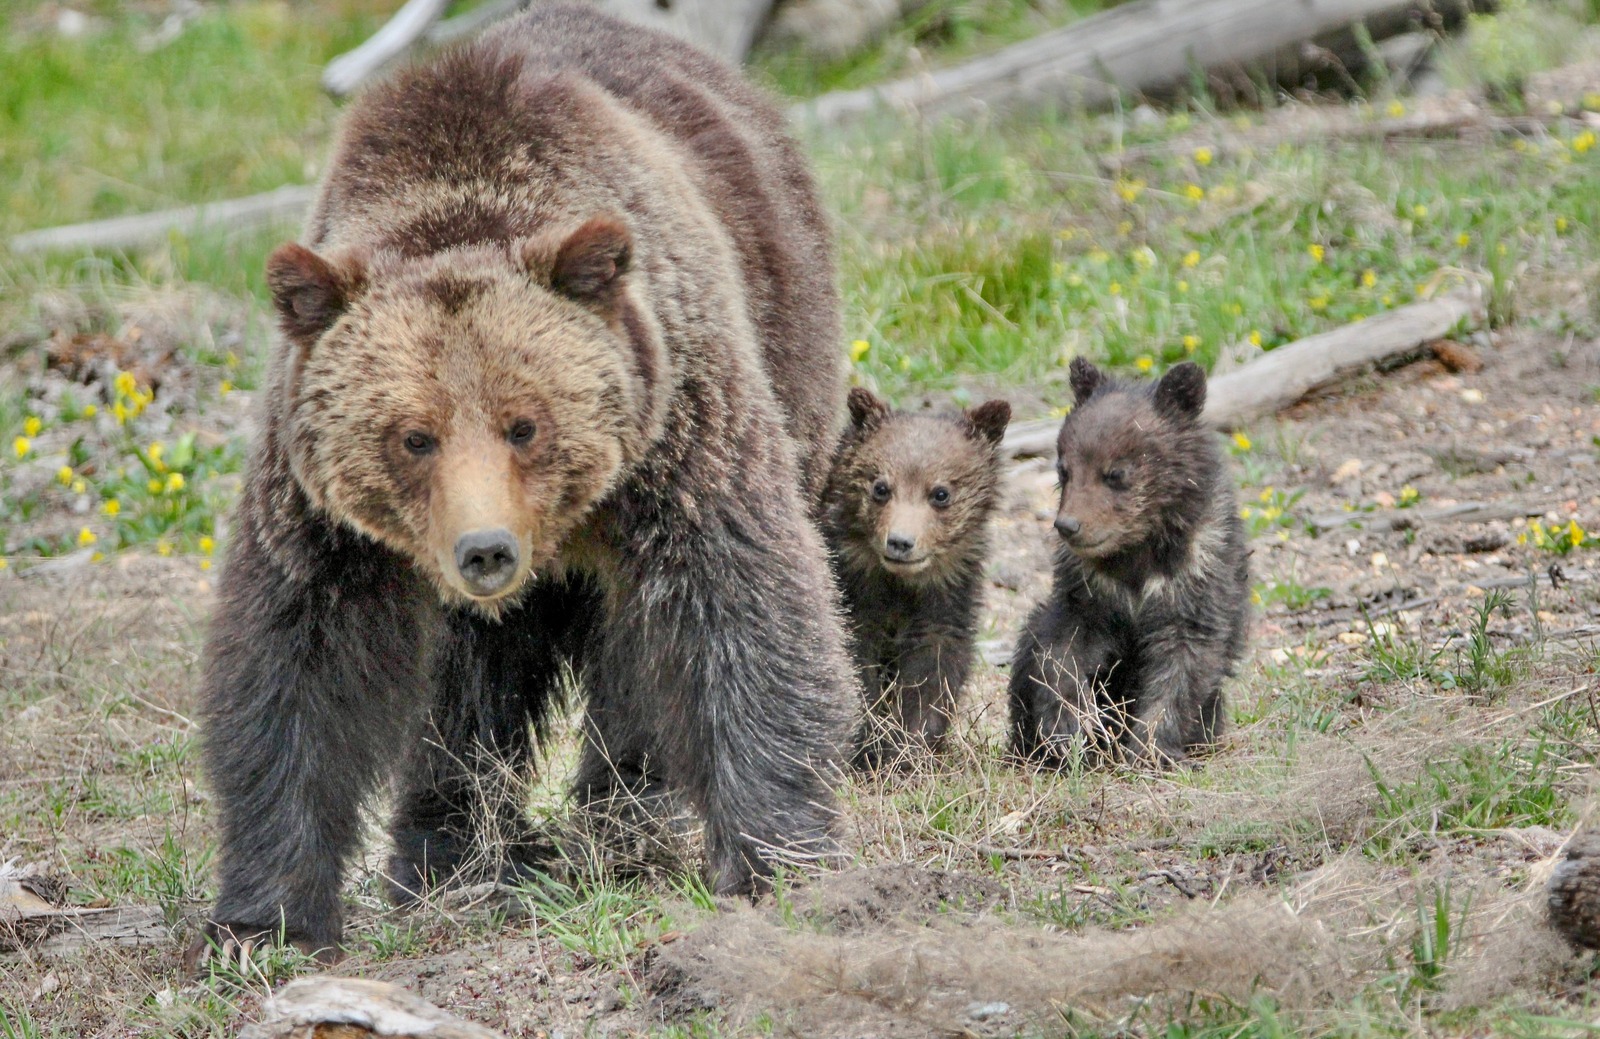 A mother bear and cubs in Yellowstone near Roaring Mountain. Photo courtesy Eric Johnston/NPS